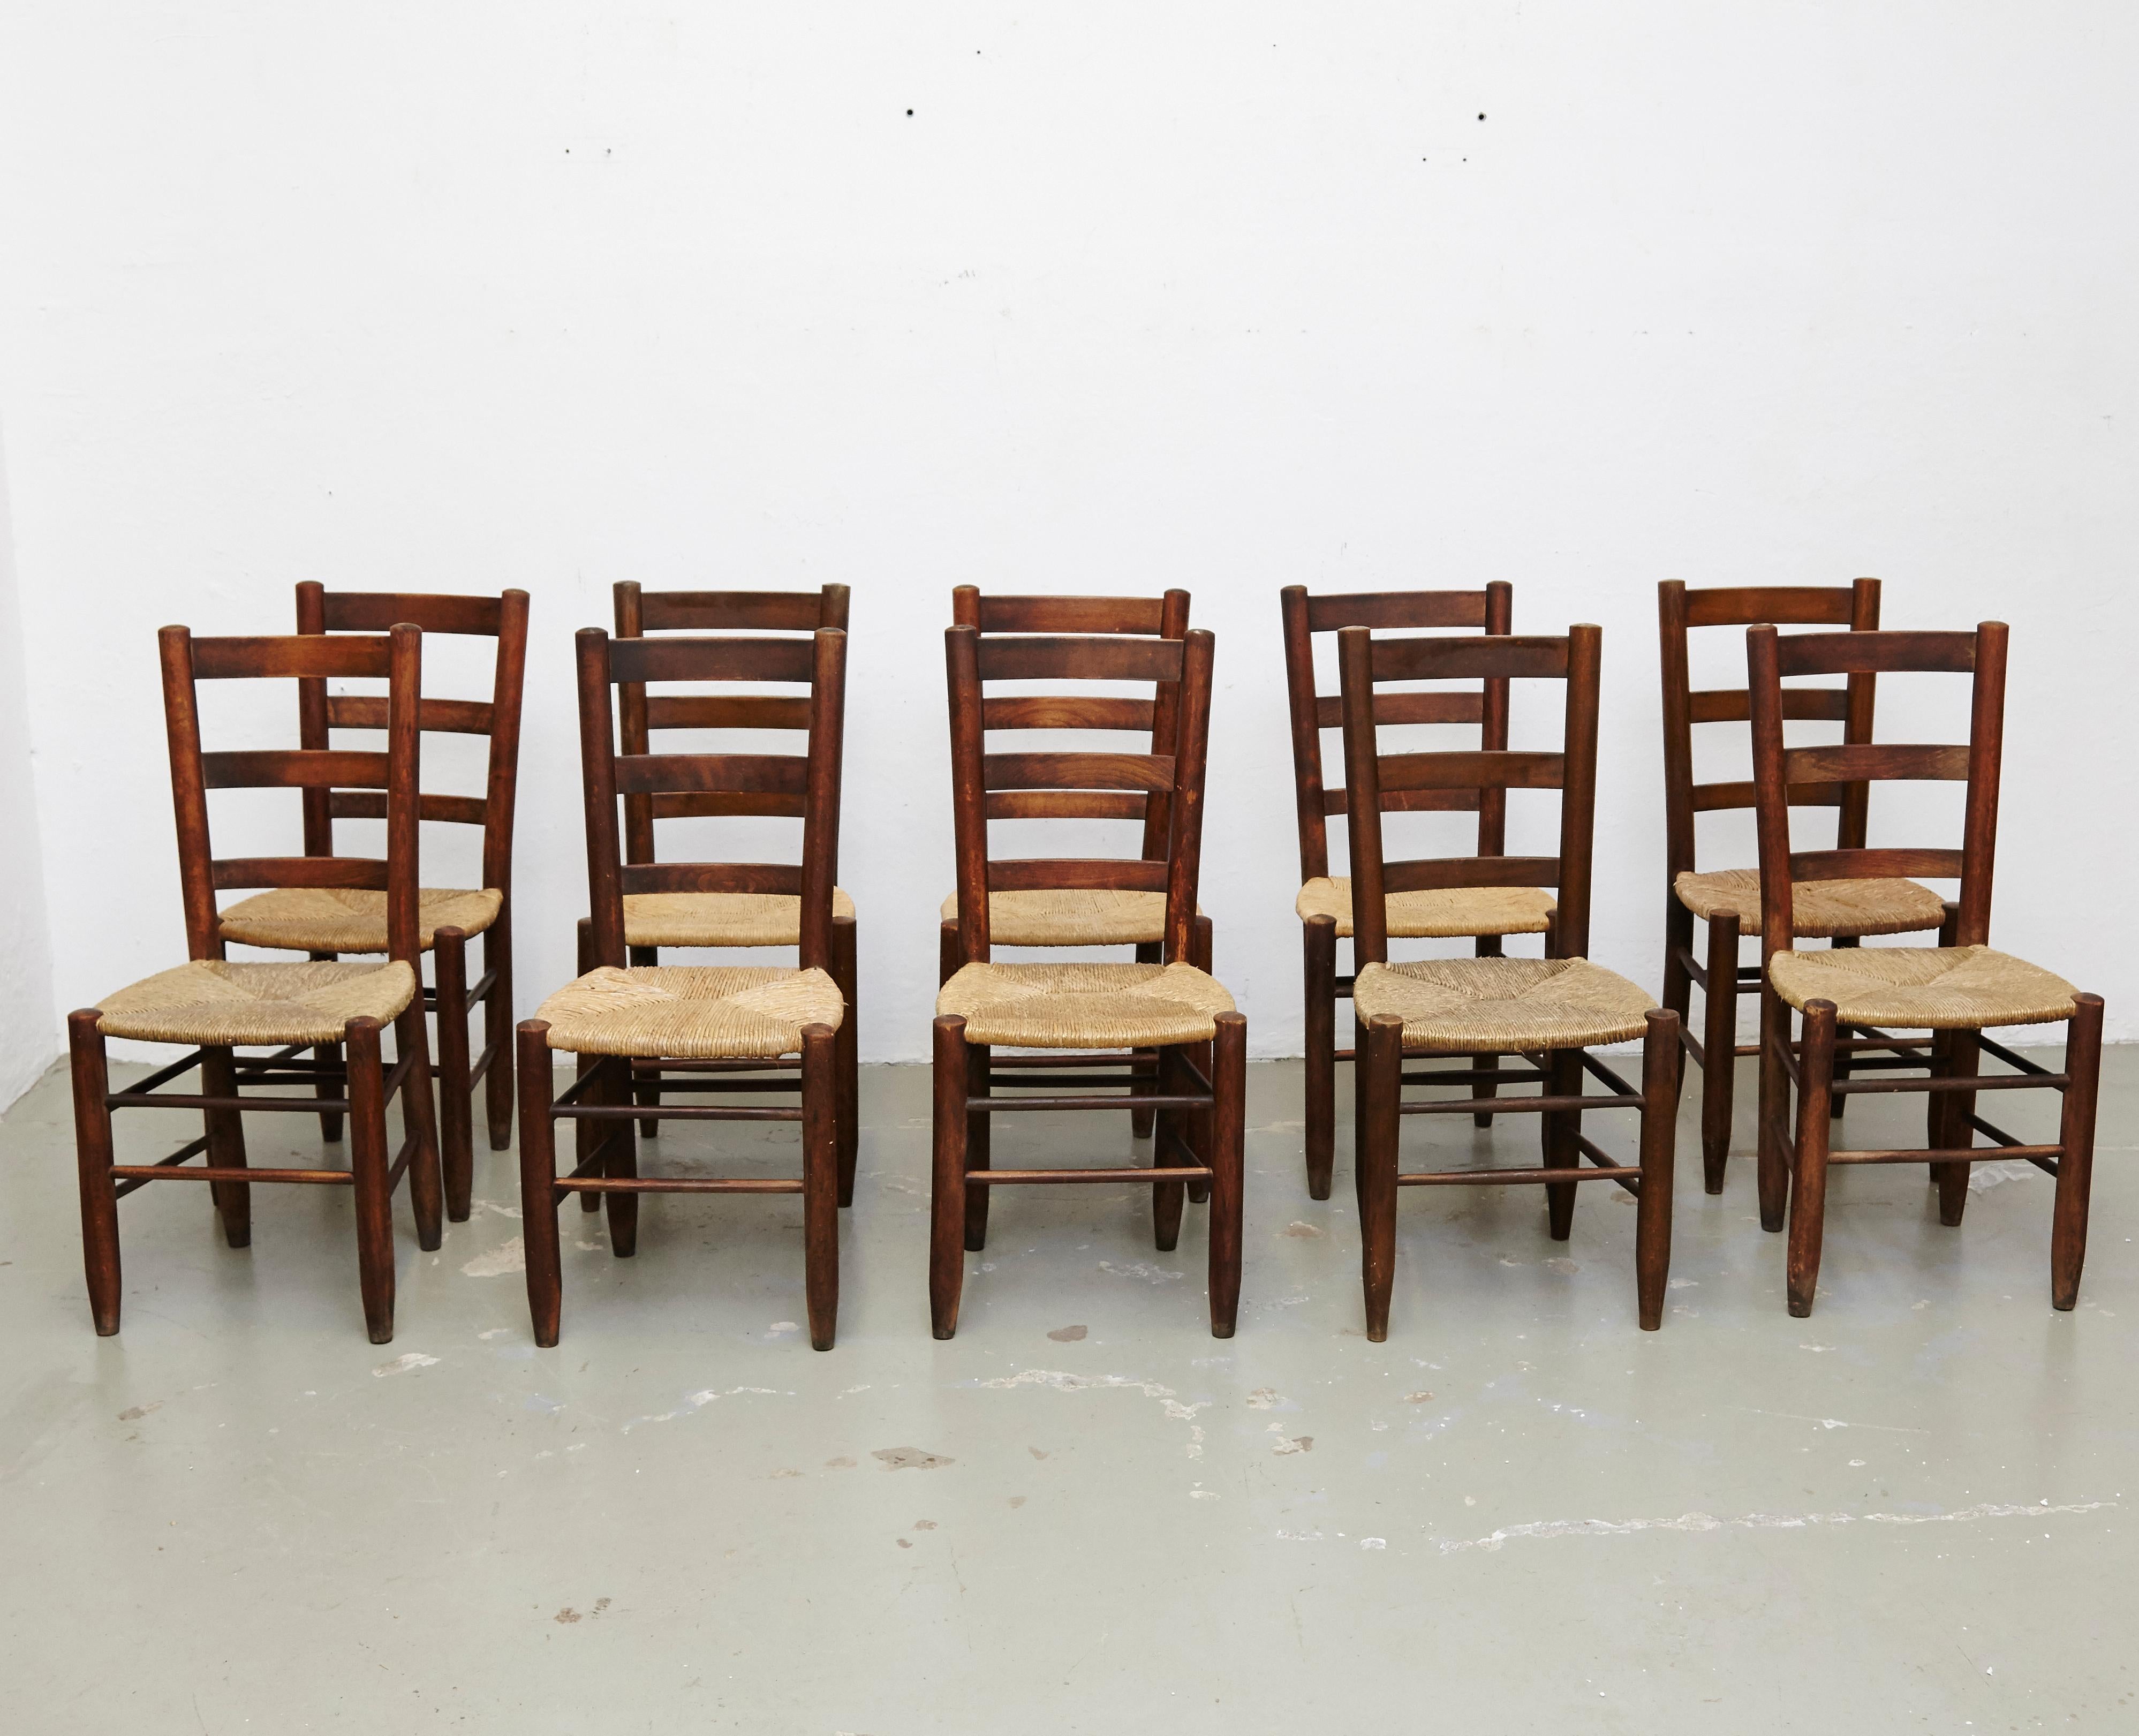 Set of Ten Charlotte Perriand Mid-Century Modern Wood Rattan French N19 Chairs 15